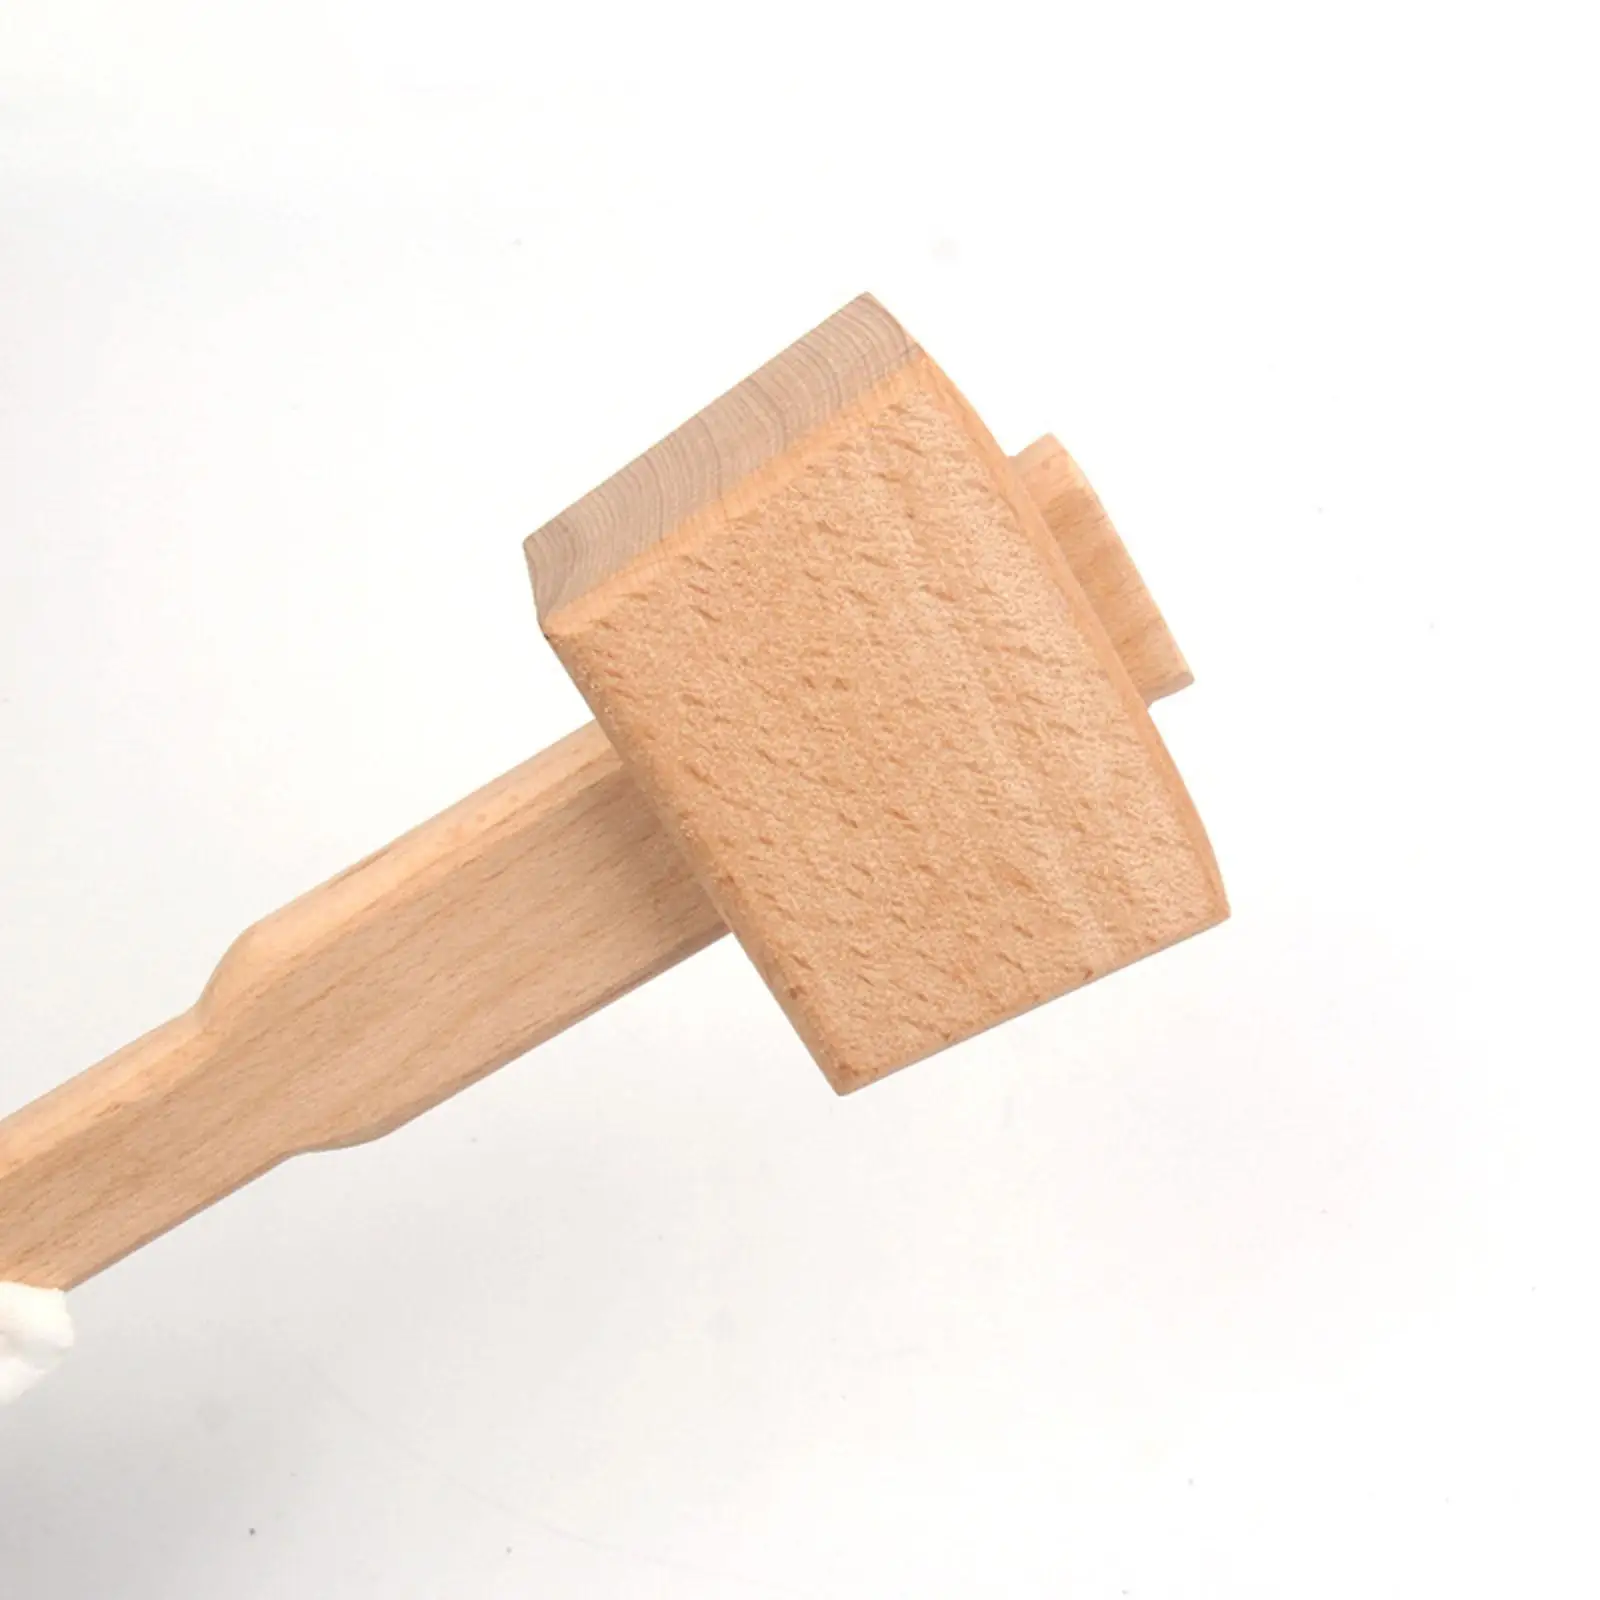 Wooden Mallet with Handle Professional Carpenter Hand Tool Carpenters Mallet for DIY Carpentry Making Tool Walnut Cracking Work